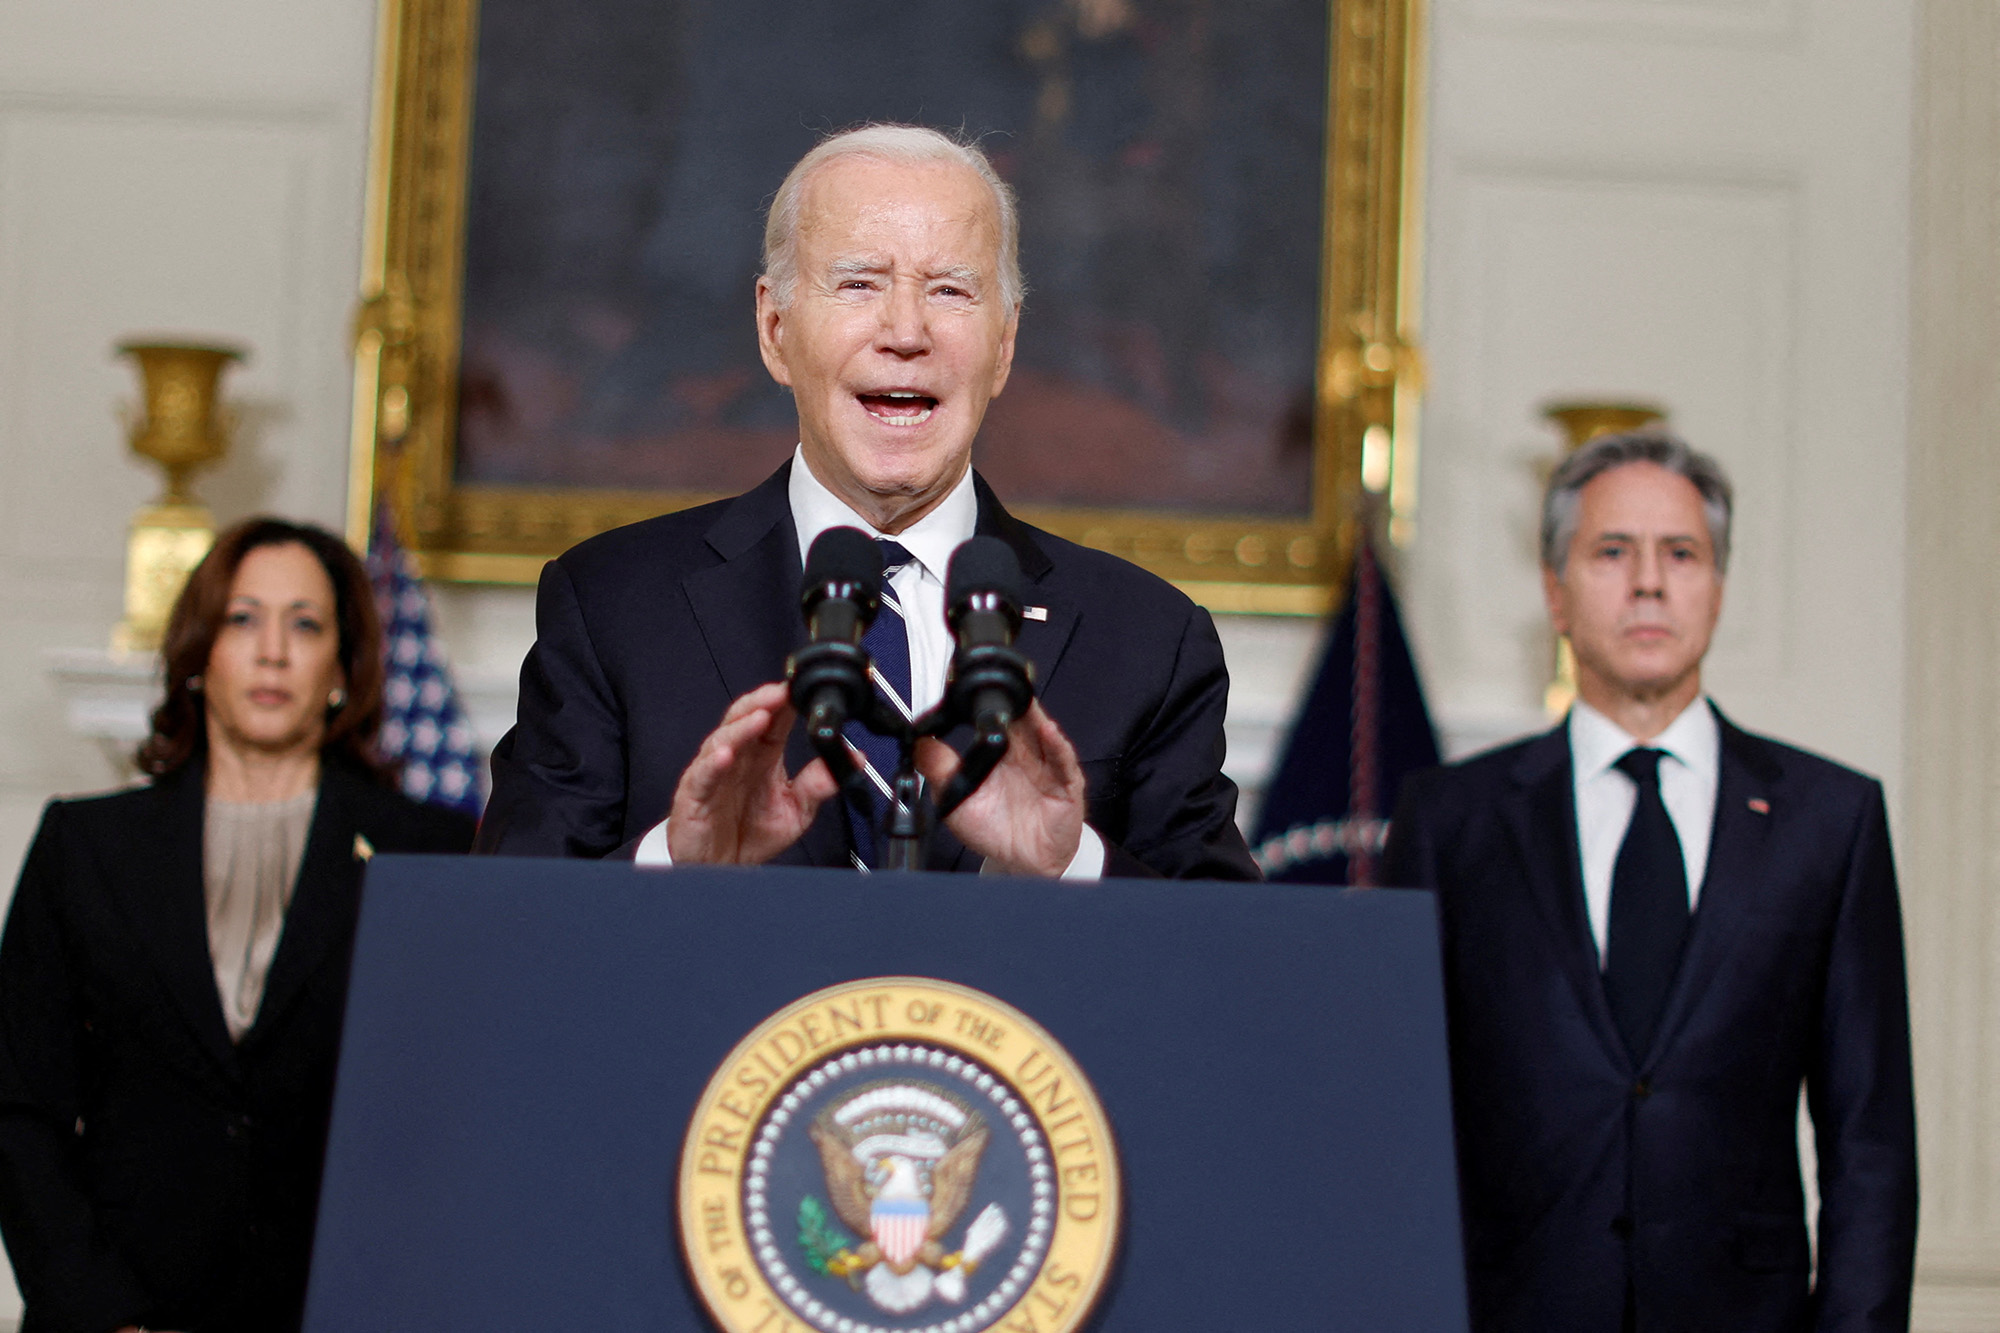 U.S. President Joe Biden, center, accompanied by Vice President Kamala Harris, left, and Secretary of State Antony Blinken, makes remarks after speaking by phone with Israeli Prime Minister Benjamin Netanyahu from the State Dining Room at the White House in Washington, DC, on October 10.